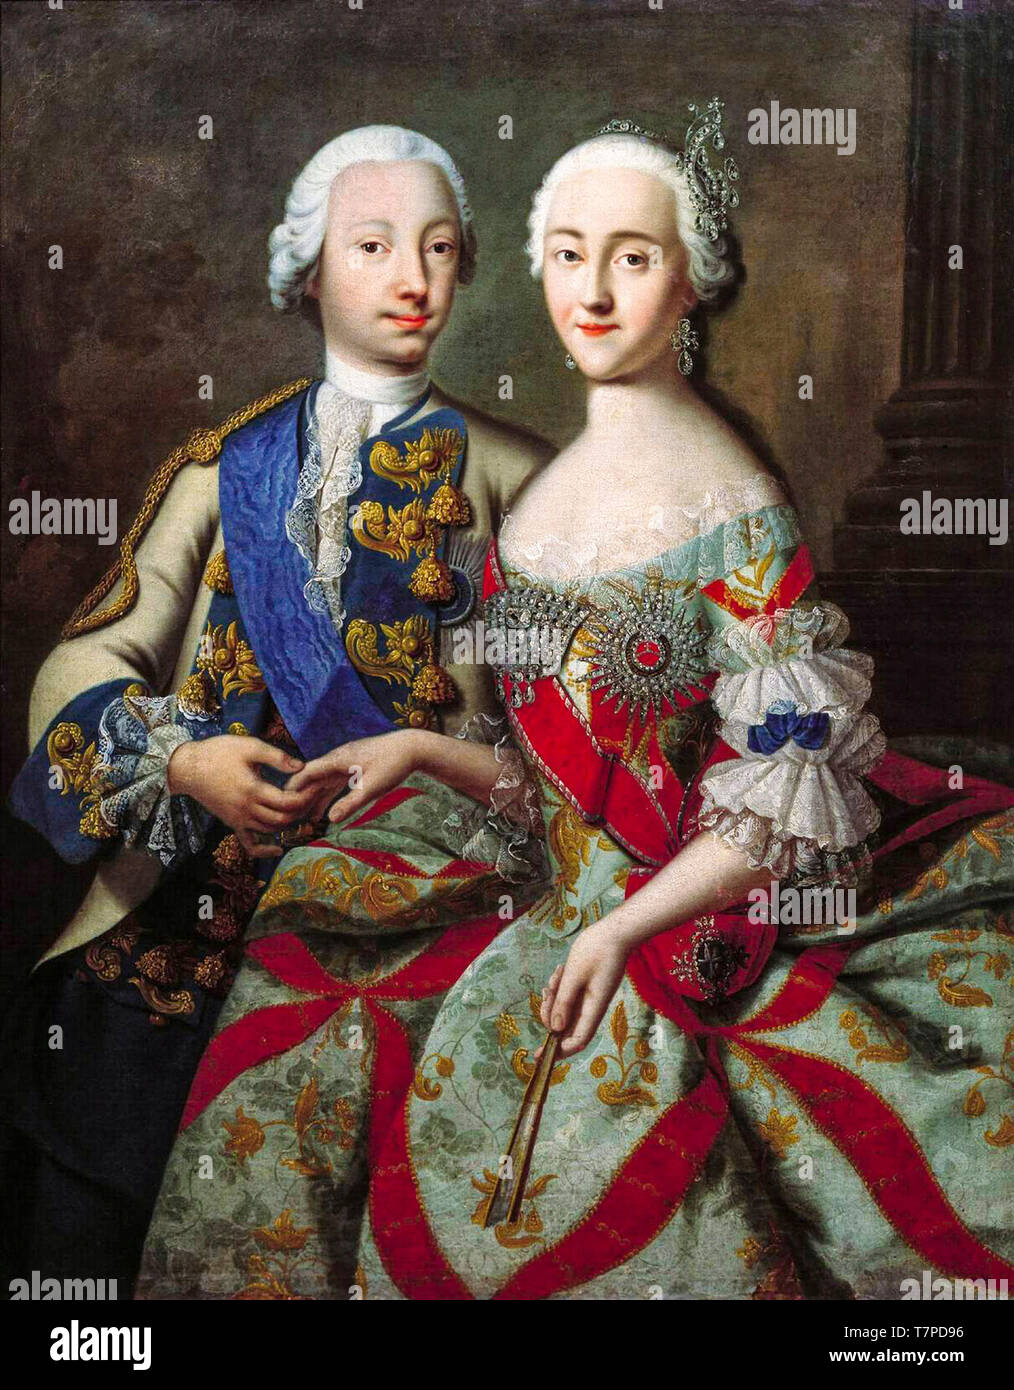 Portrait of Grand Duke Peter Fedorovich (future Peter III) and his wife Grand Duchess Catherine Alexeevna (future Catherine II), painting by Georg Cristoph Grooth, c. 1745 Stock Photo